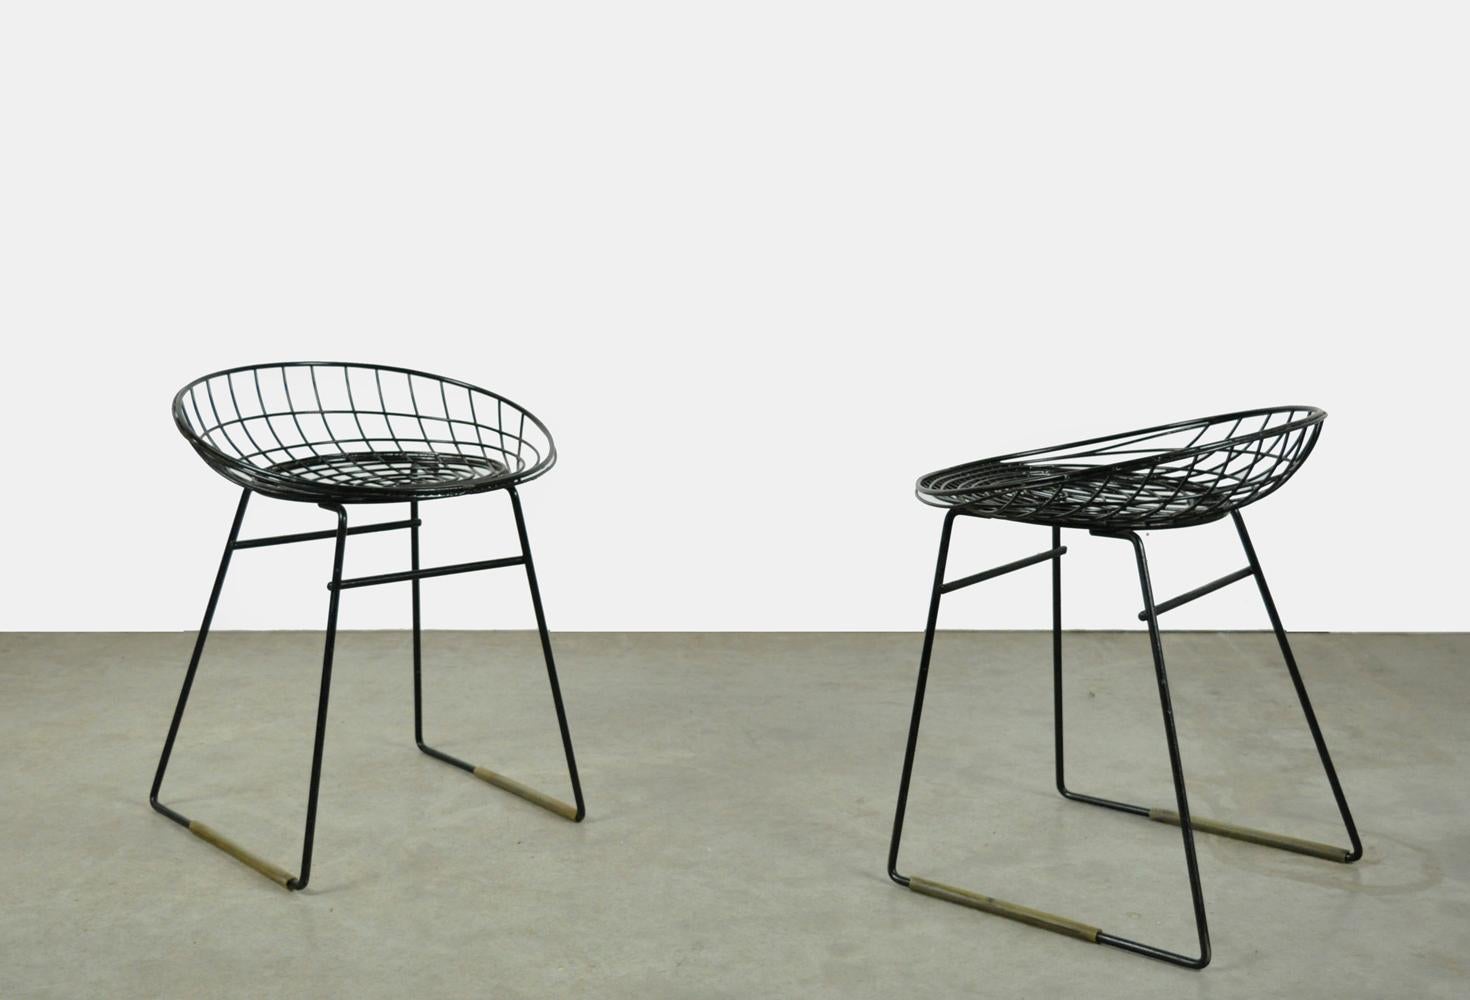 Set of two wire steel stools, model KM05, designed by Cees Braakman and Adriaan Dekker for Pastoe, 1950s. The metal wires have a black plastic coating. The wire stool was designed in collaboration with Tomado in the 1950s. Original version with